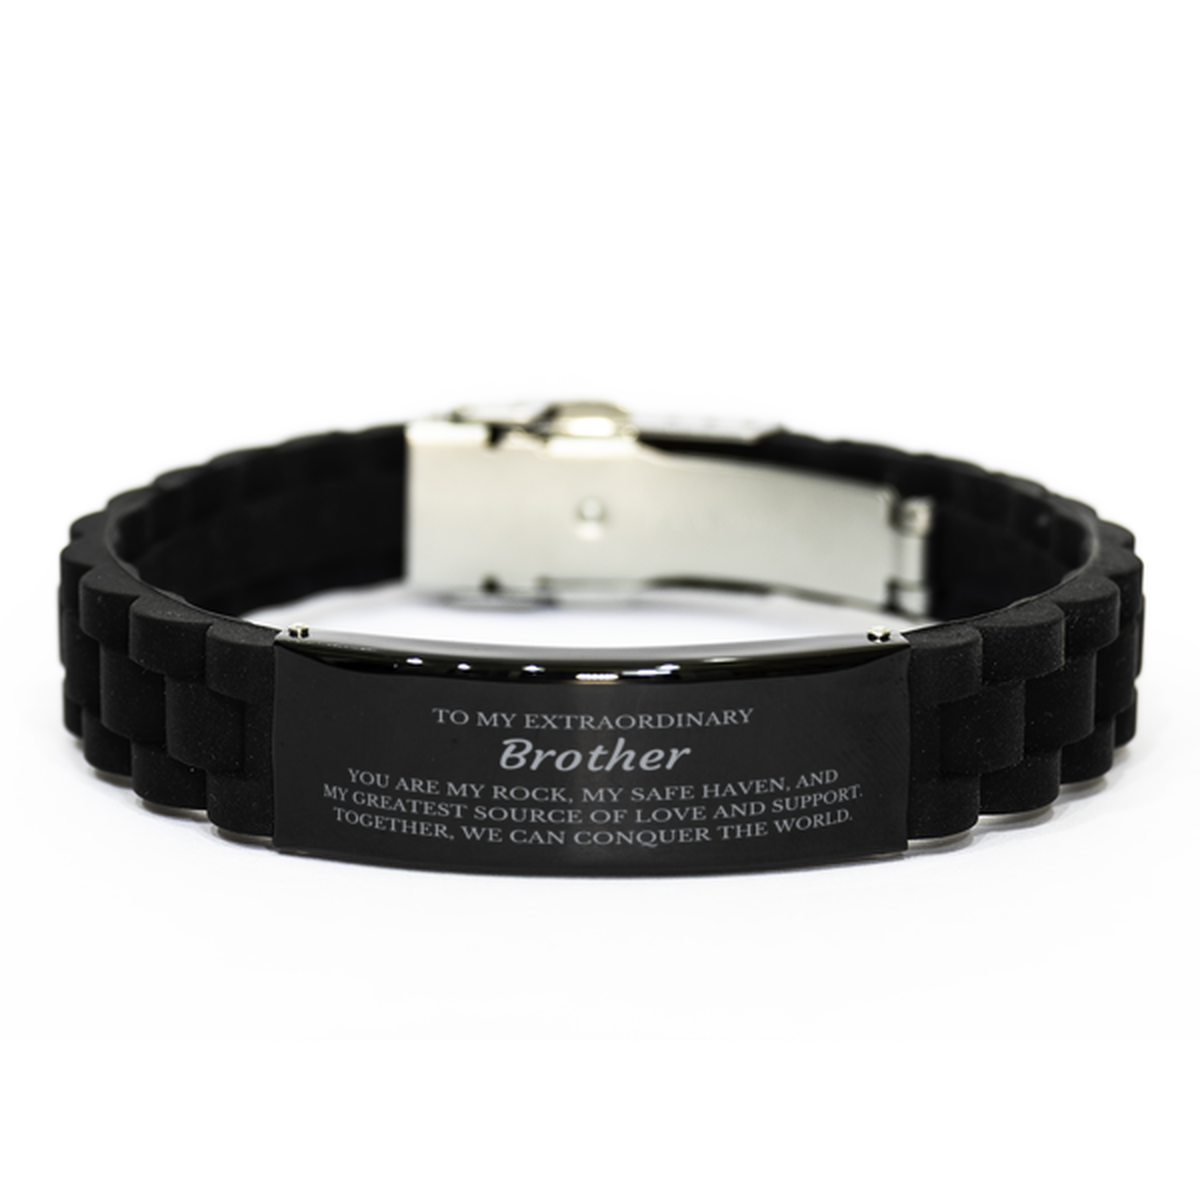 To My Extraordinary Brother Gifts, Together, we can conquer the world, Birthday Black Glidelock Clasp Bracelet For Brother, Christmas Gifts For Brother